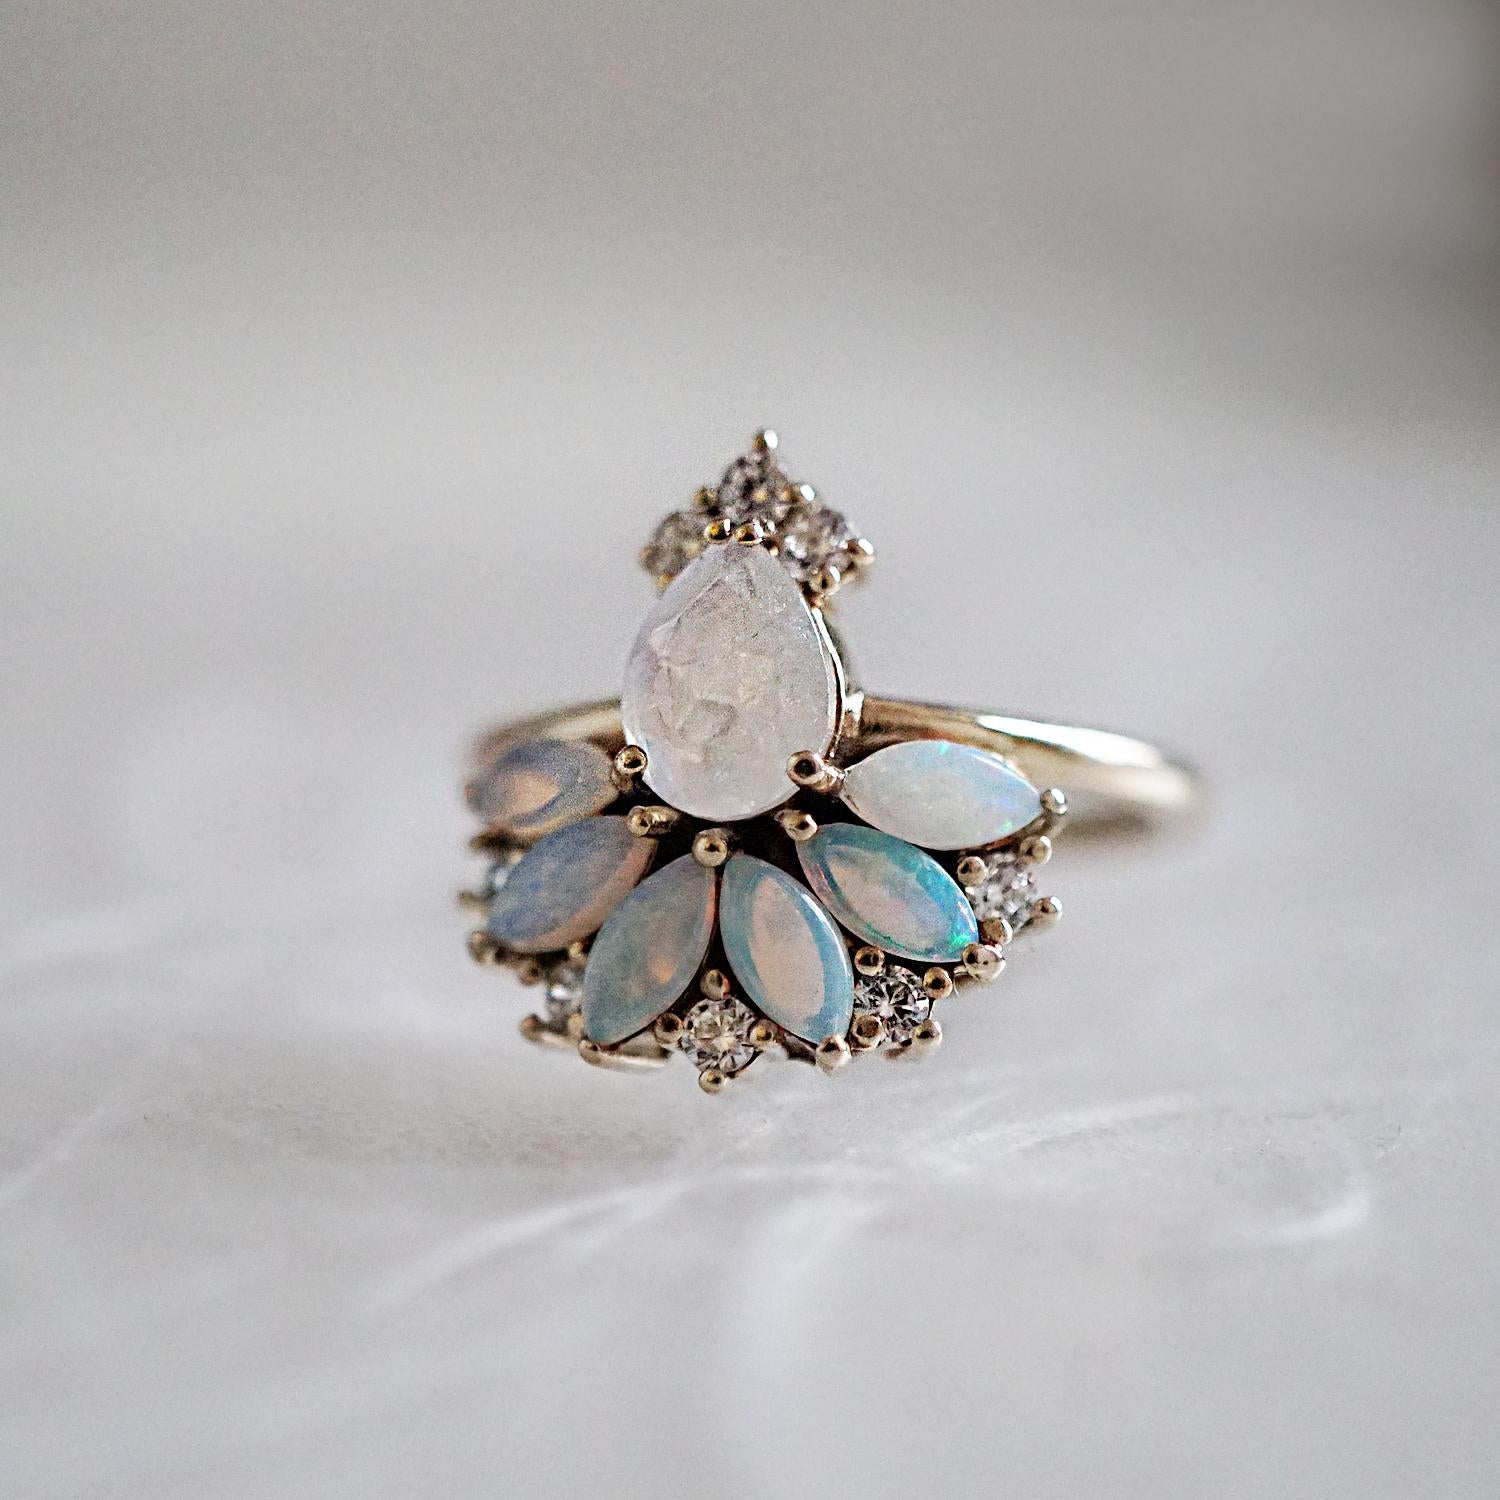 ** Tippy Taste Heirloom Collection are made to order. Please allow 3-4 week turnaround time. Make a note of your ring size and metal color during checkout. 

Blue pixie dust with a touch of moonlight. A fairytale inspired ring featuring 6 beautiful